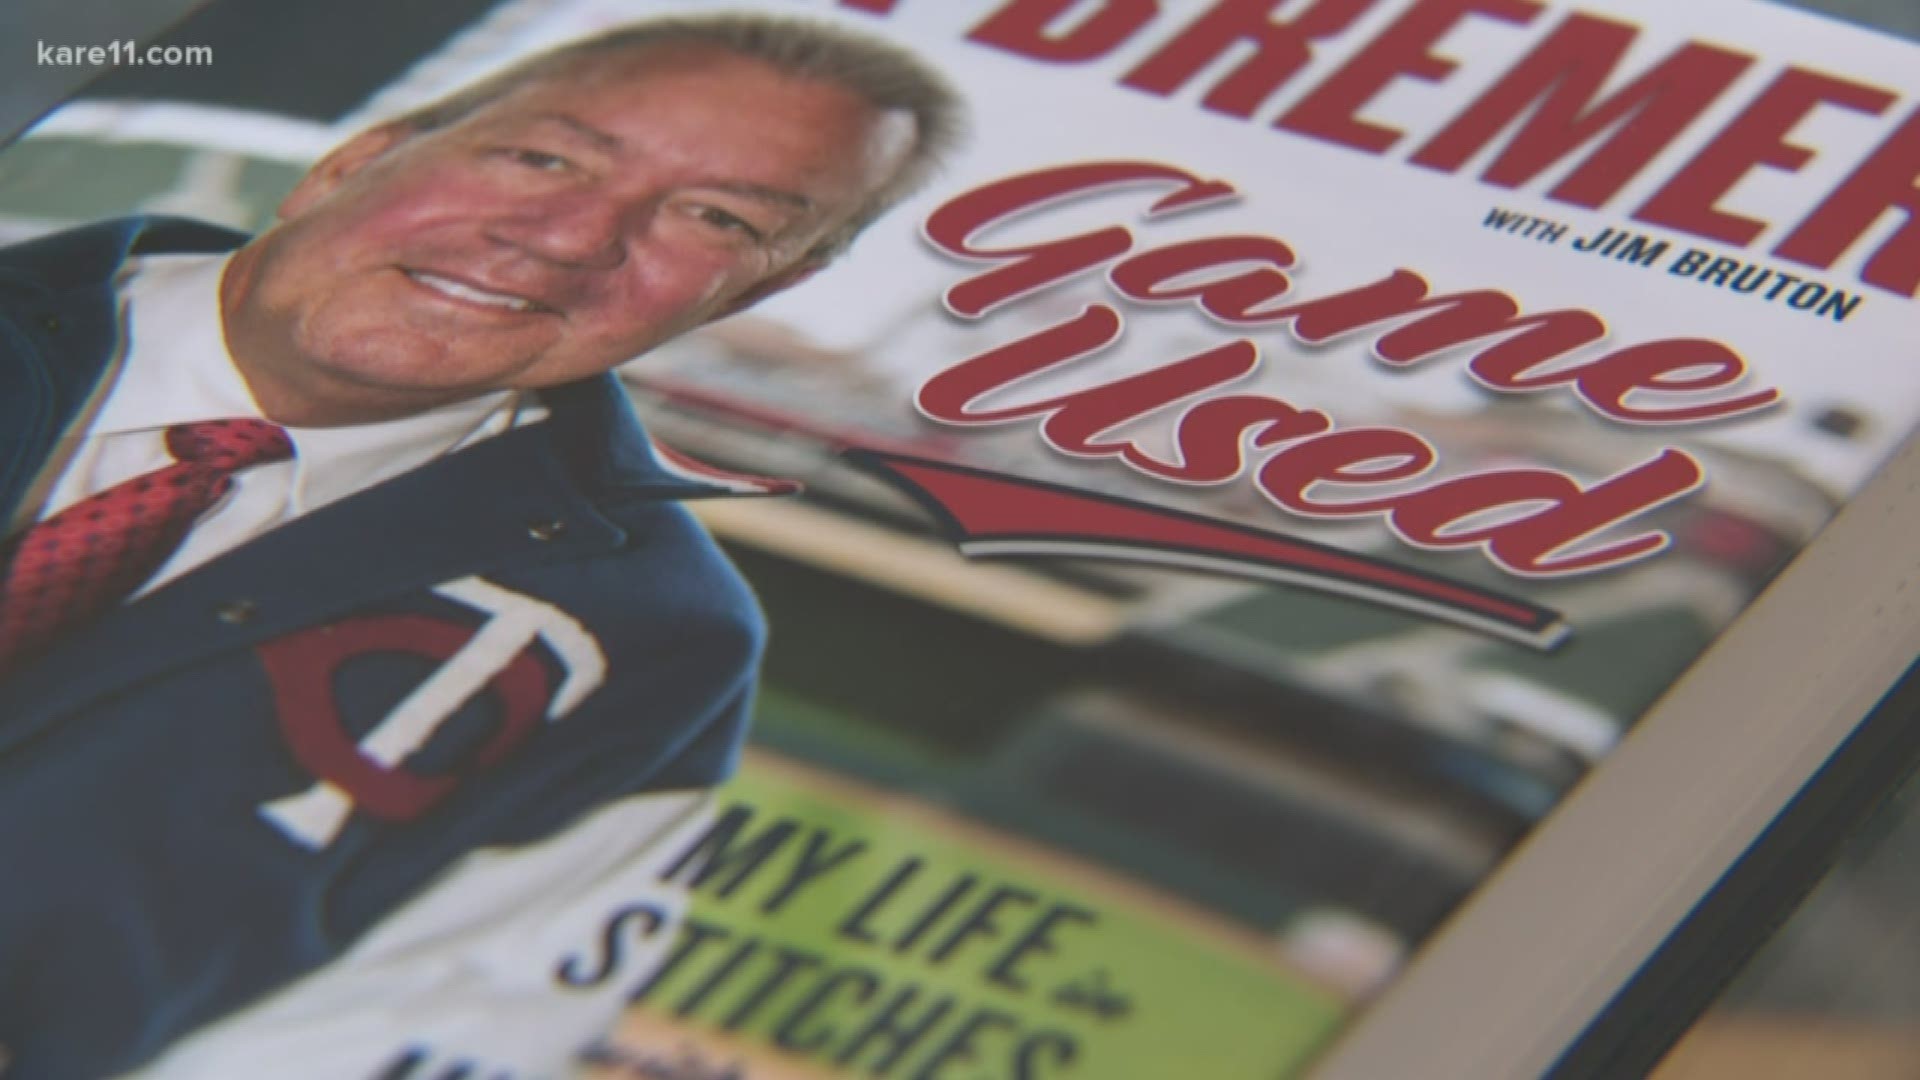 Dick Bremer wrote a book highlighting some of the biggest moments in Minnesota Twins history.